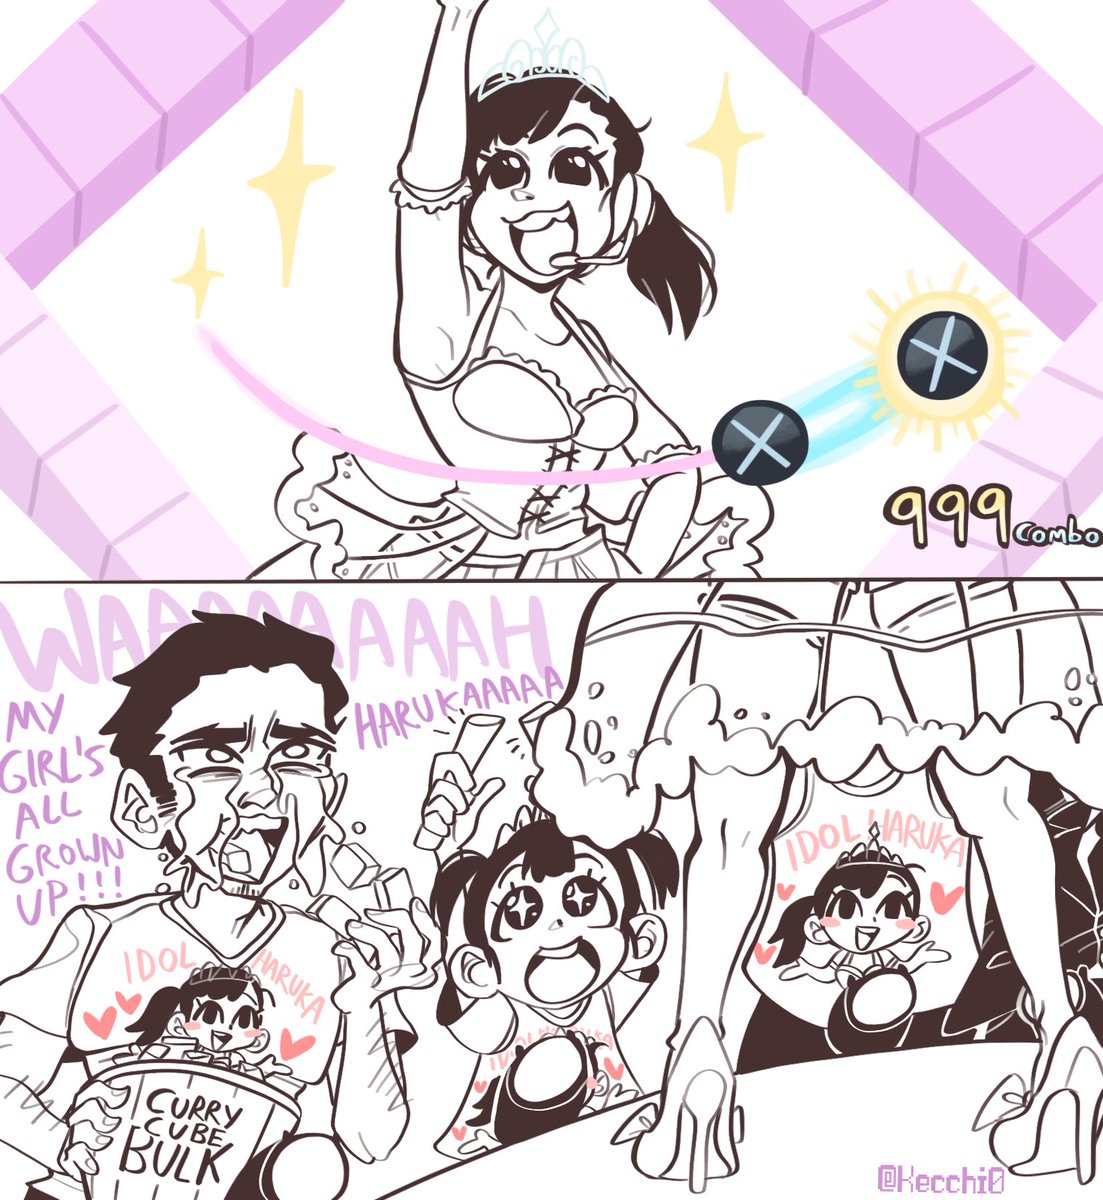 Oddly specific meme of Kiryu from Yakuza crying and watching Haruka perform at a concert and eating a bucket of curry cubes as he is overwhelmed with happiness for @TheSpeakerGreen 